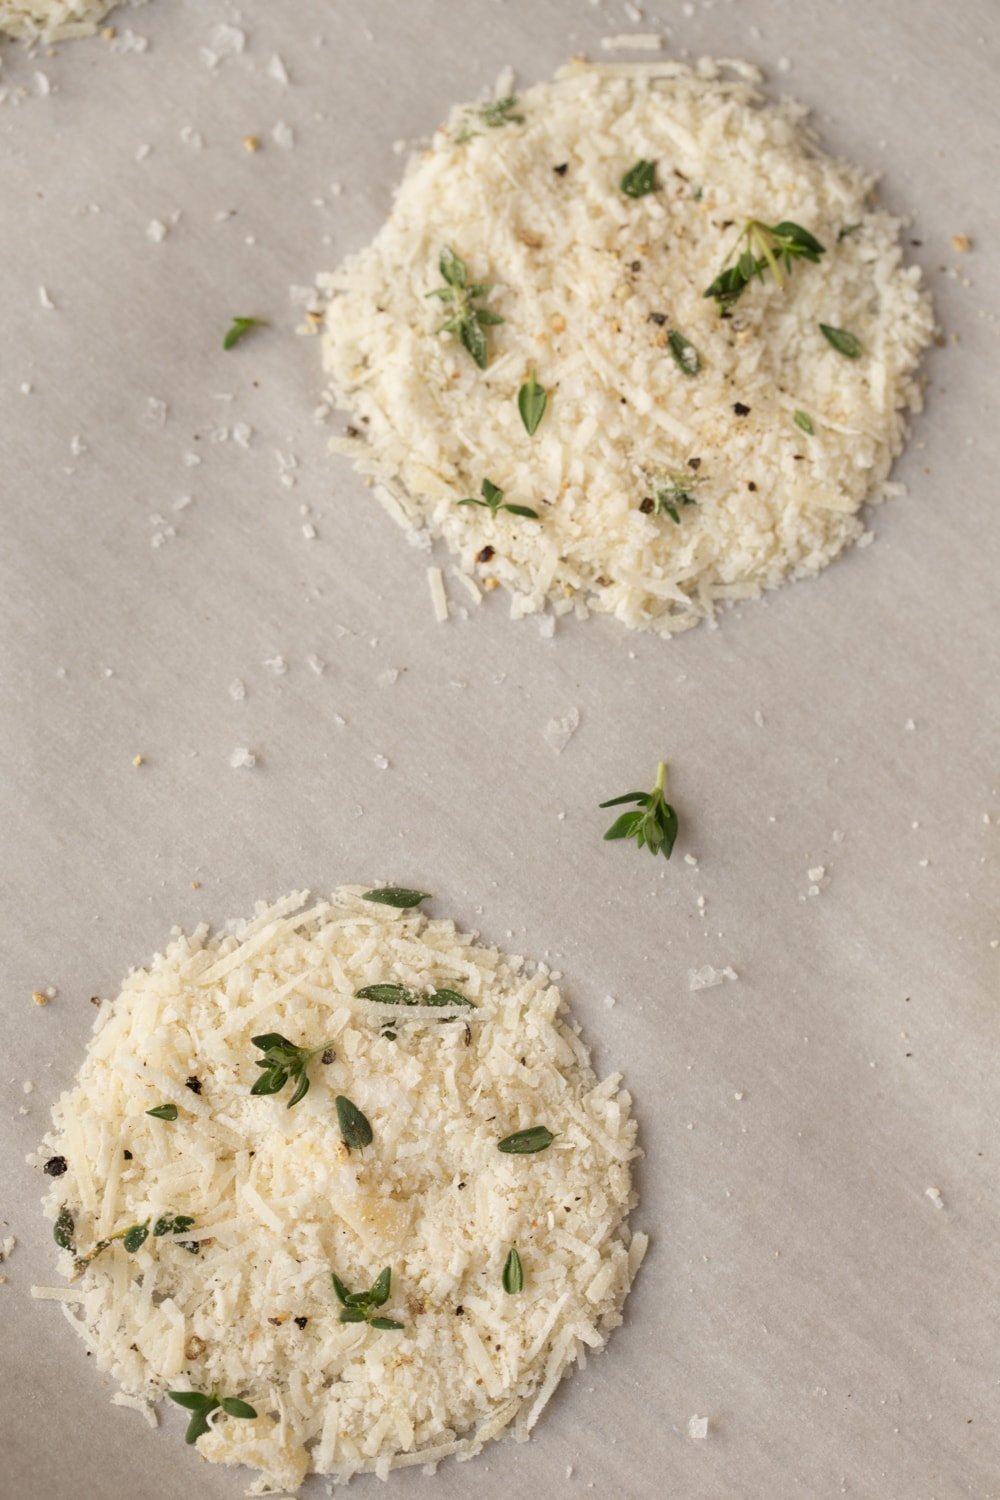 Parmesan Crisps with Thyme and Sea Salt - one of the most elegant (and easy!) Italian-inspired appetizers you'll ever have the pleasure of meeting. A delicious little bite to go with cocktails, on salads or as a soup topping. thecafesucrefarine.com